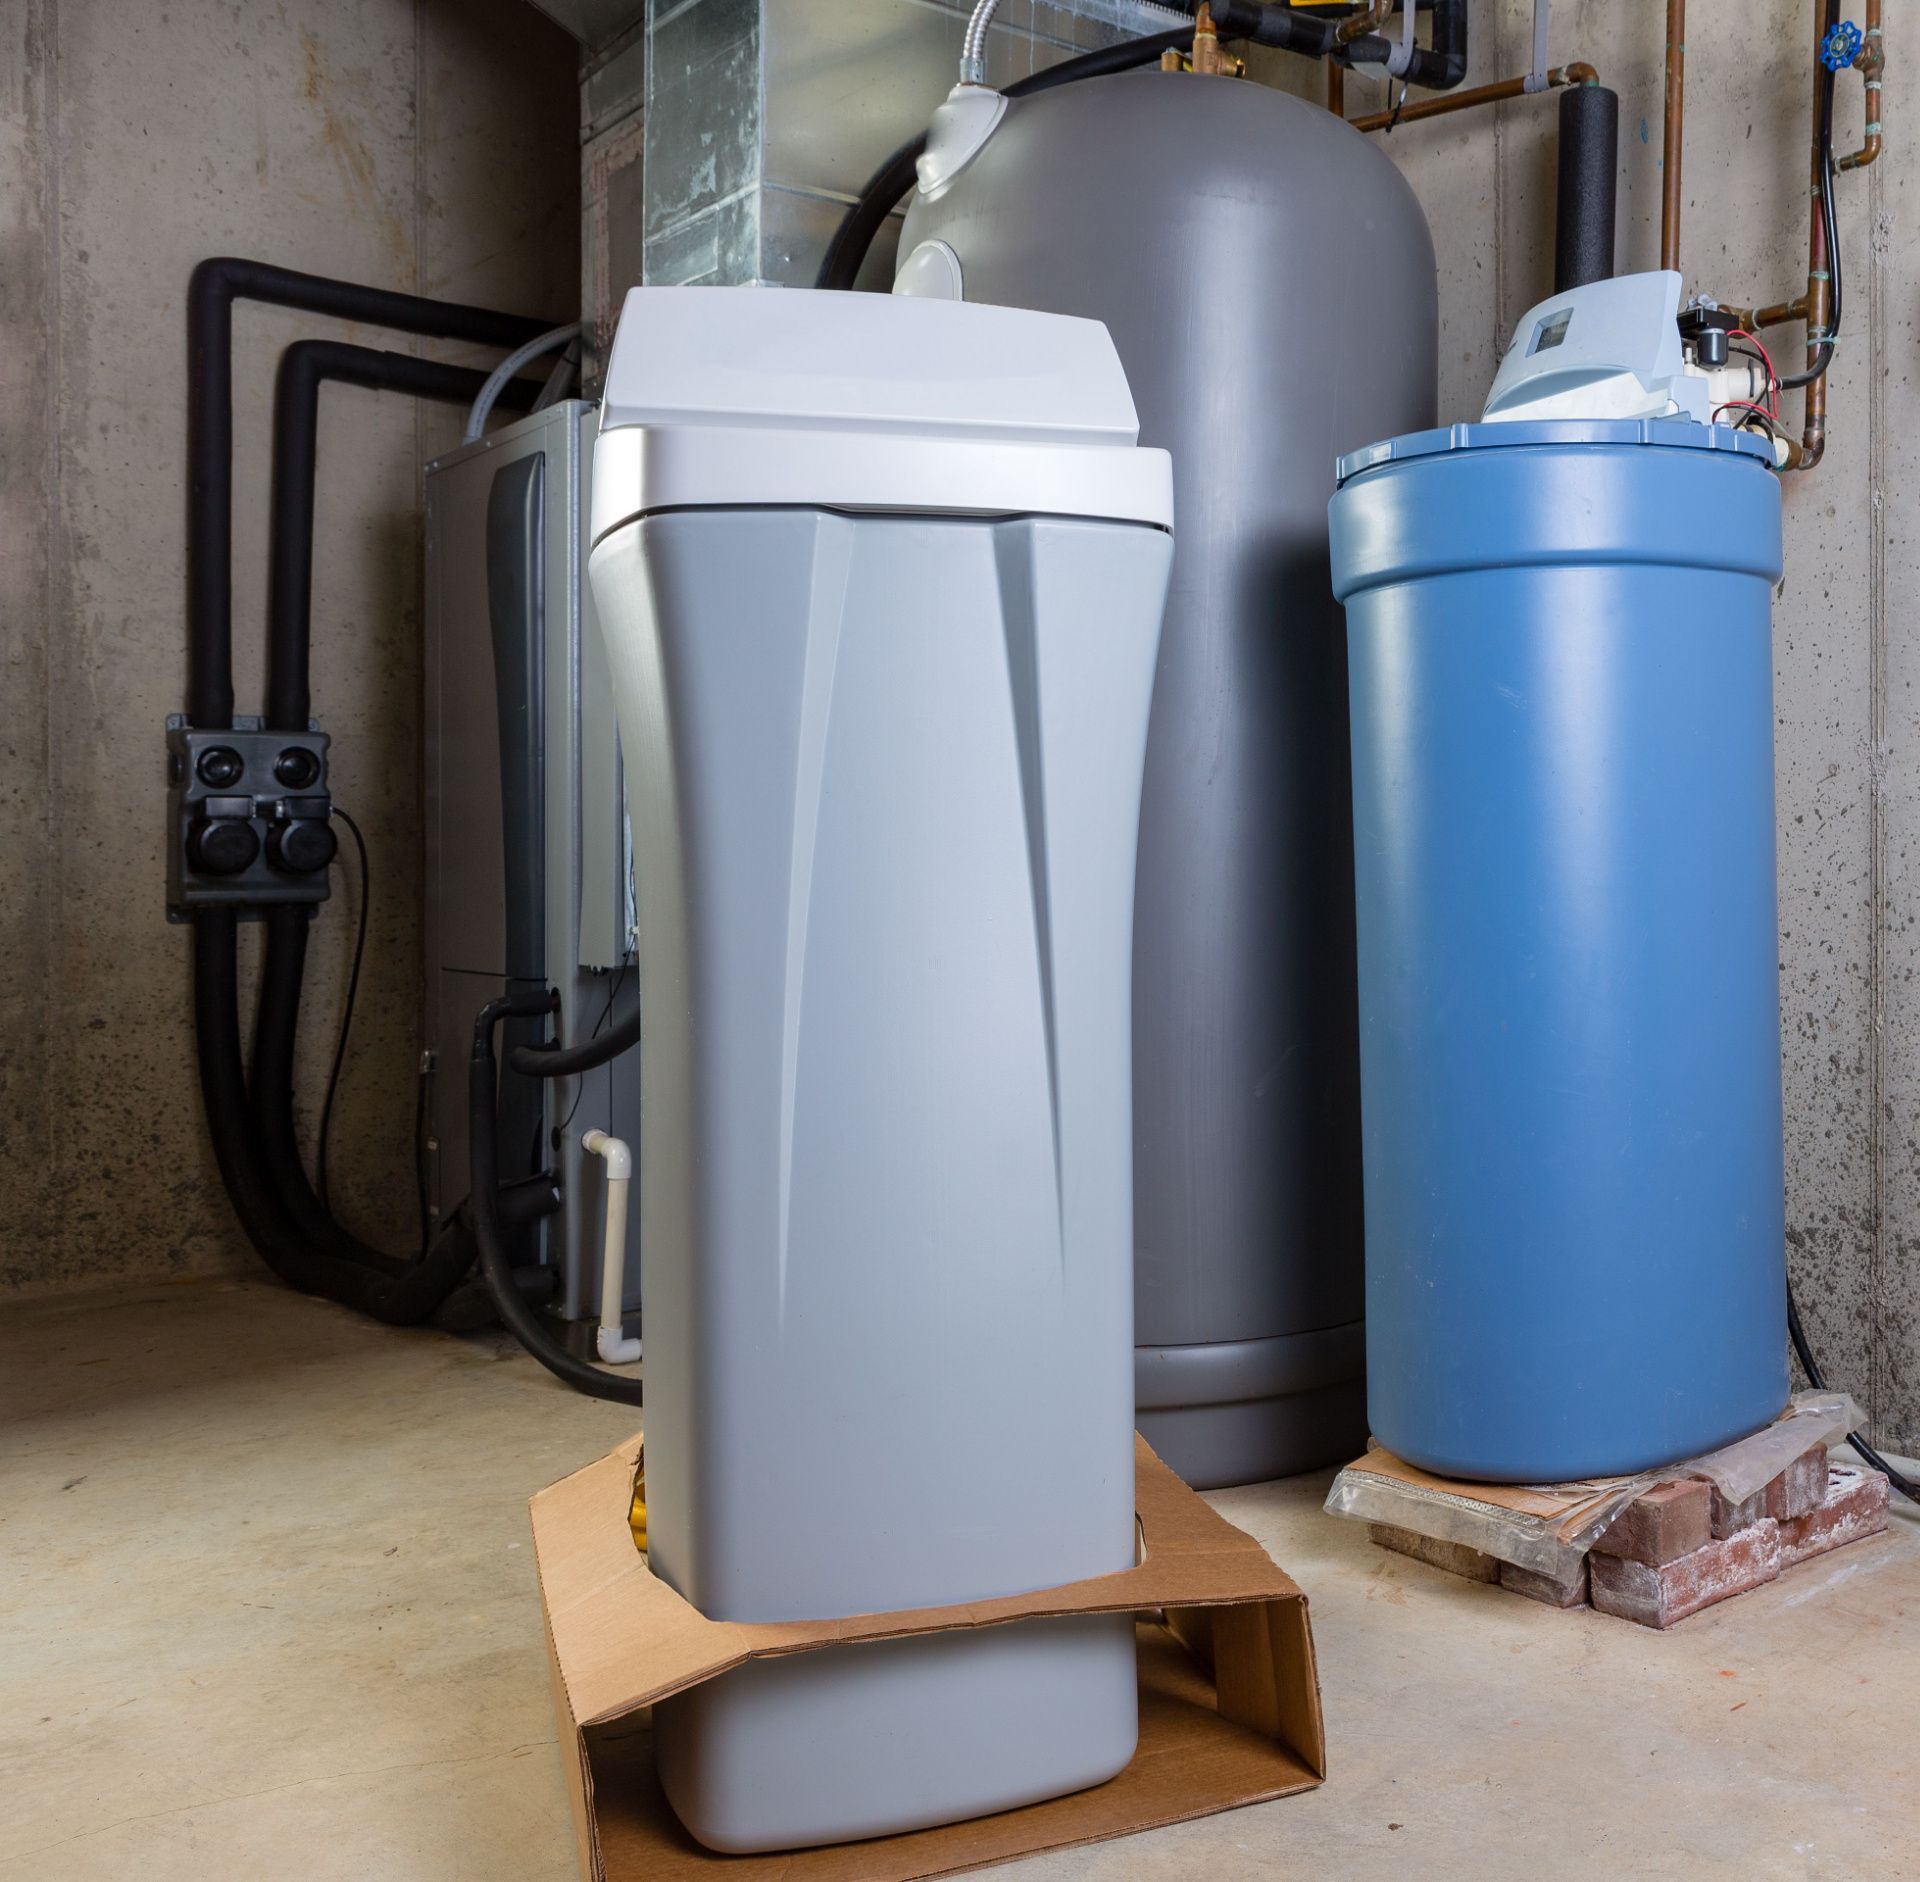 Water Softener Installation and Repair in Central MN